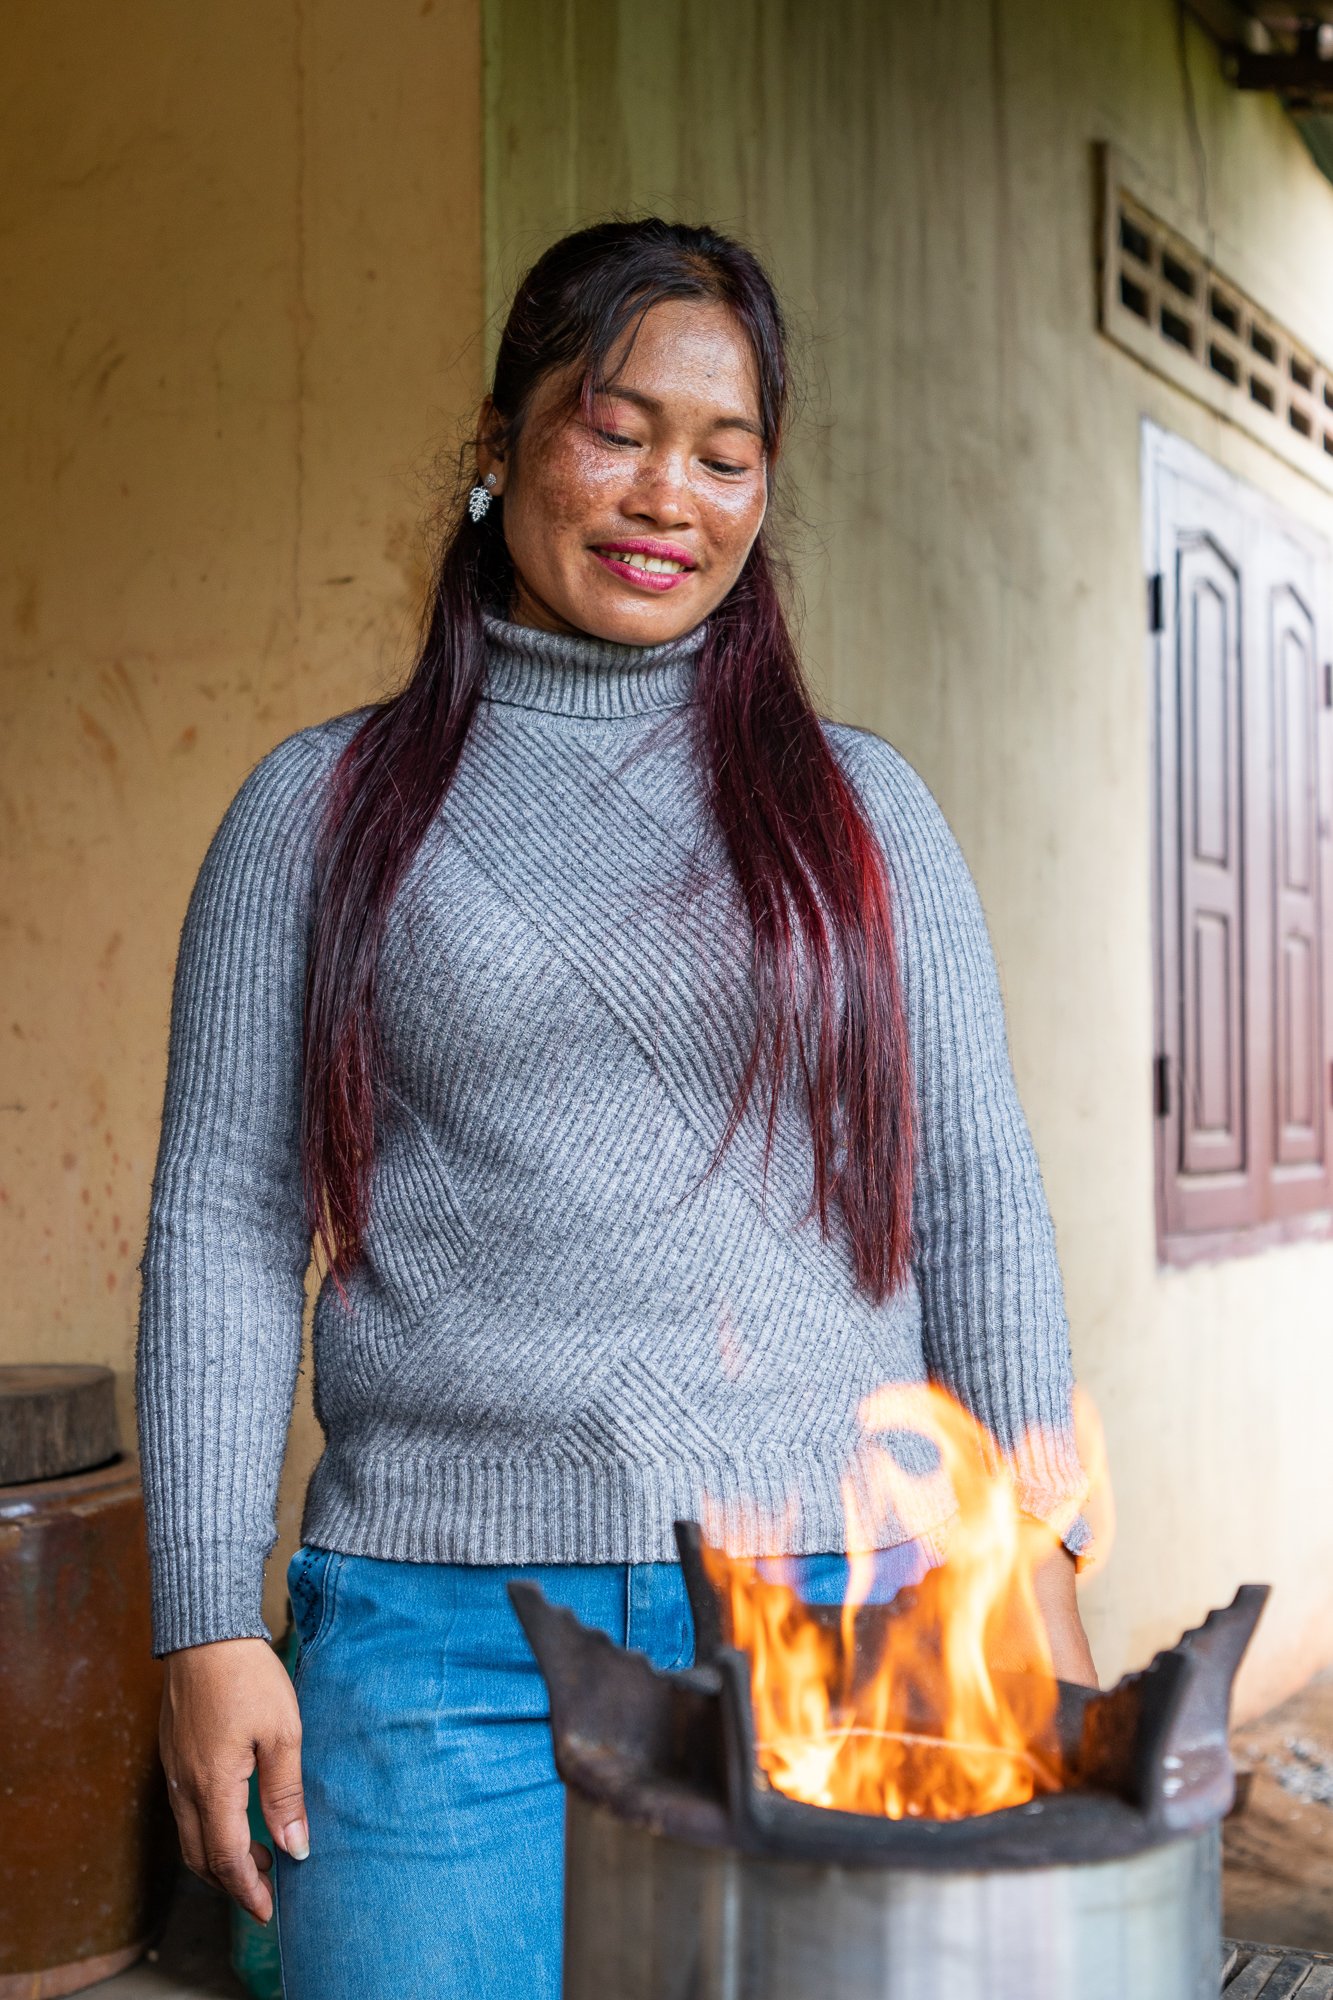 Seap Rain looking at her ACE cooking stove bought using a loan from the NGO Kiva, Siem Reap, Cambodia